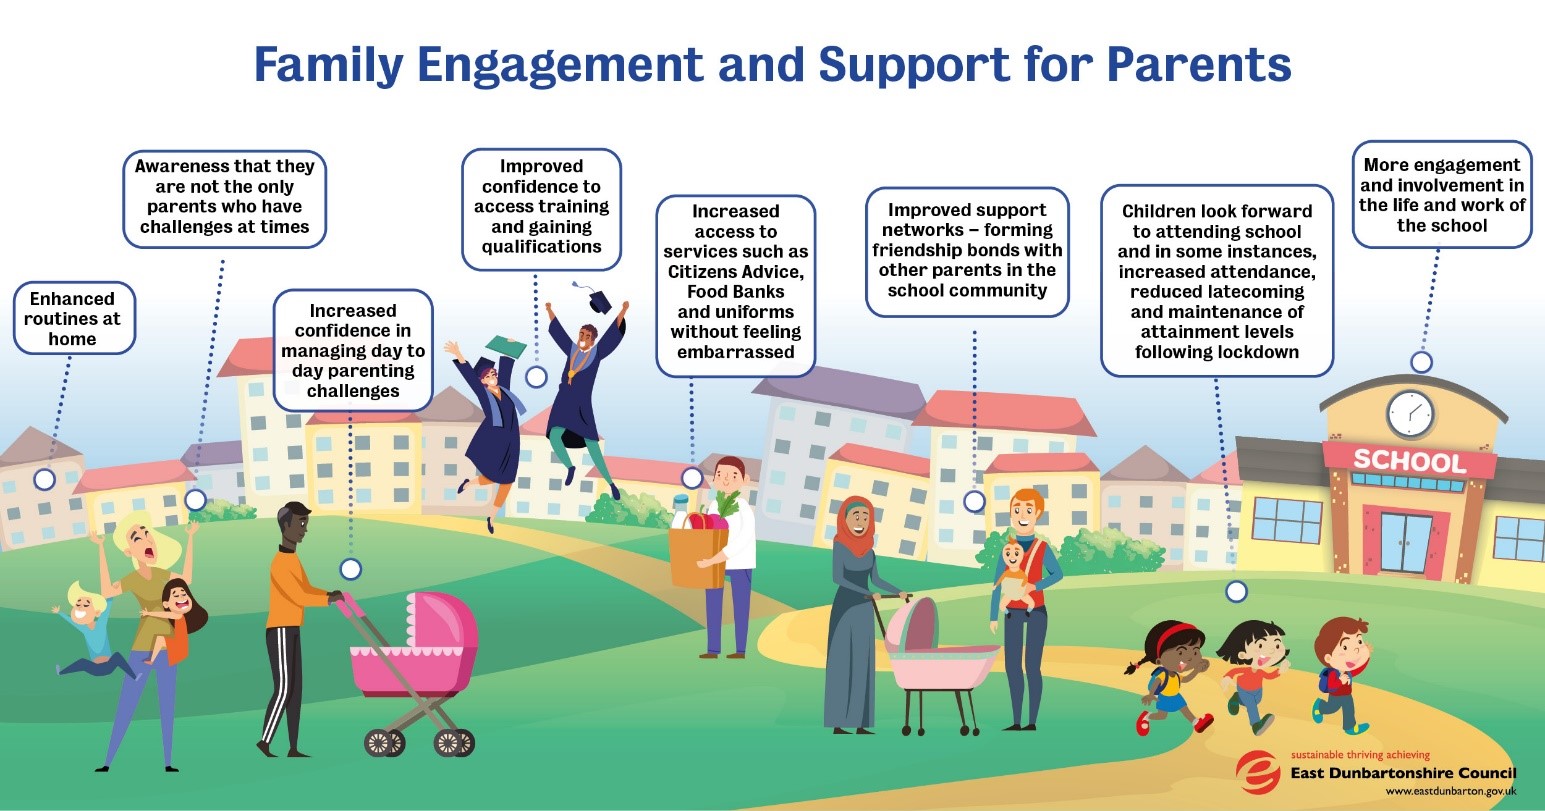 Family engagement and support for parents poster that shows parents and kids standing outside houses and a school building